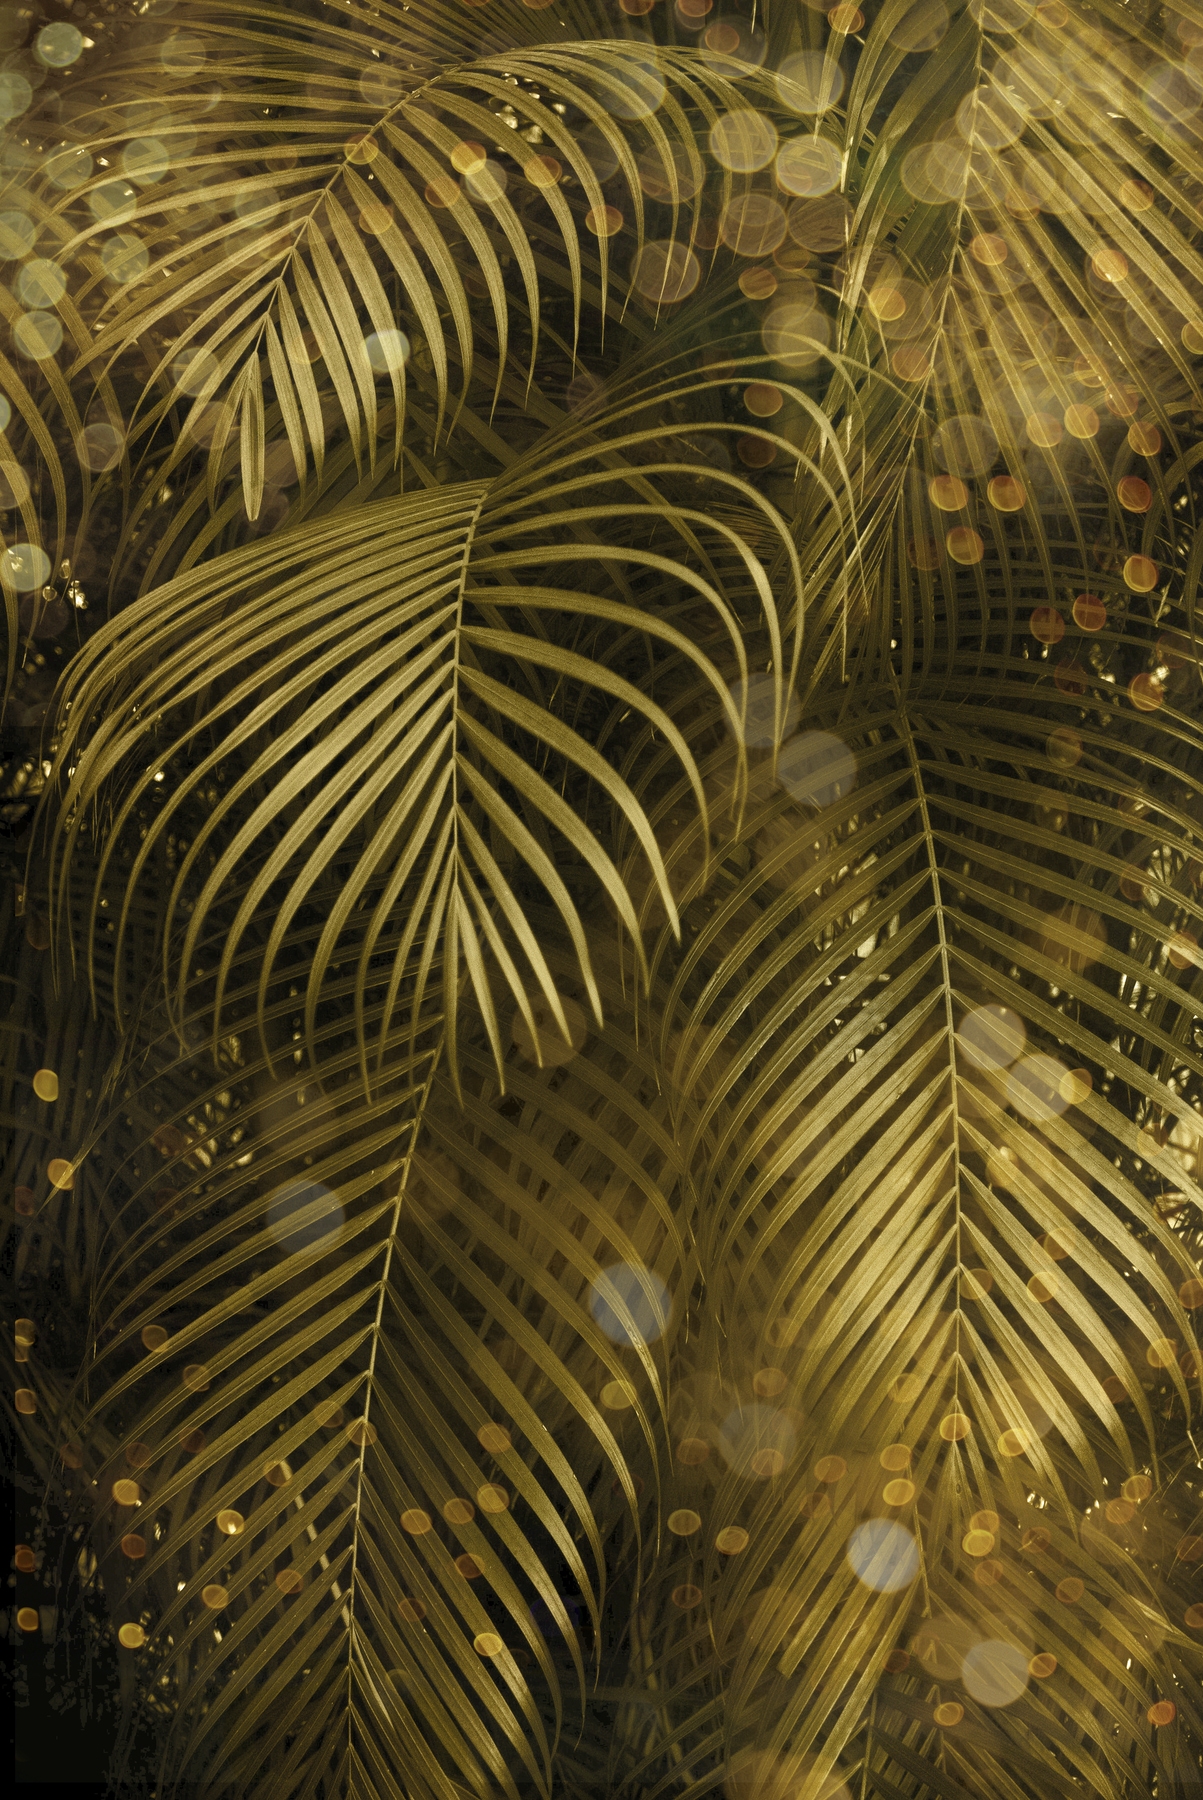 Buy Golden Sparkle Palm Leaves wallpaper - Free shipping